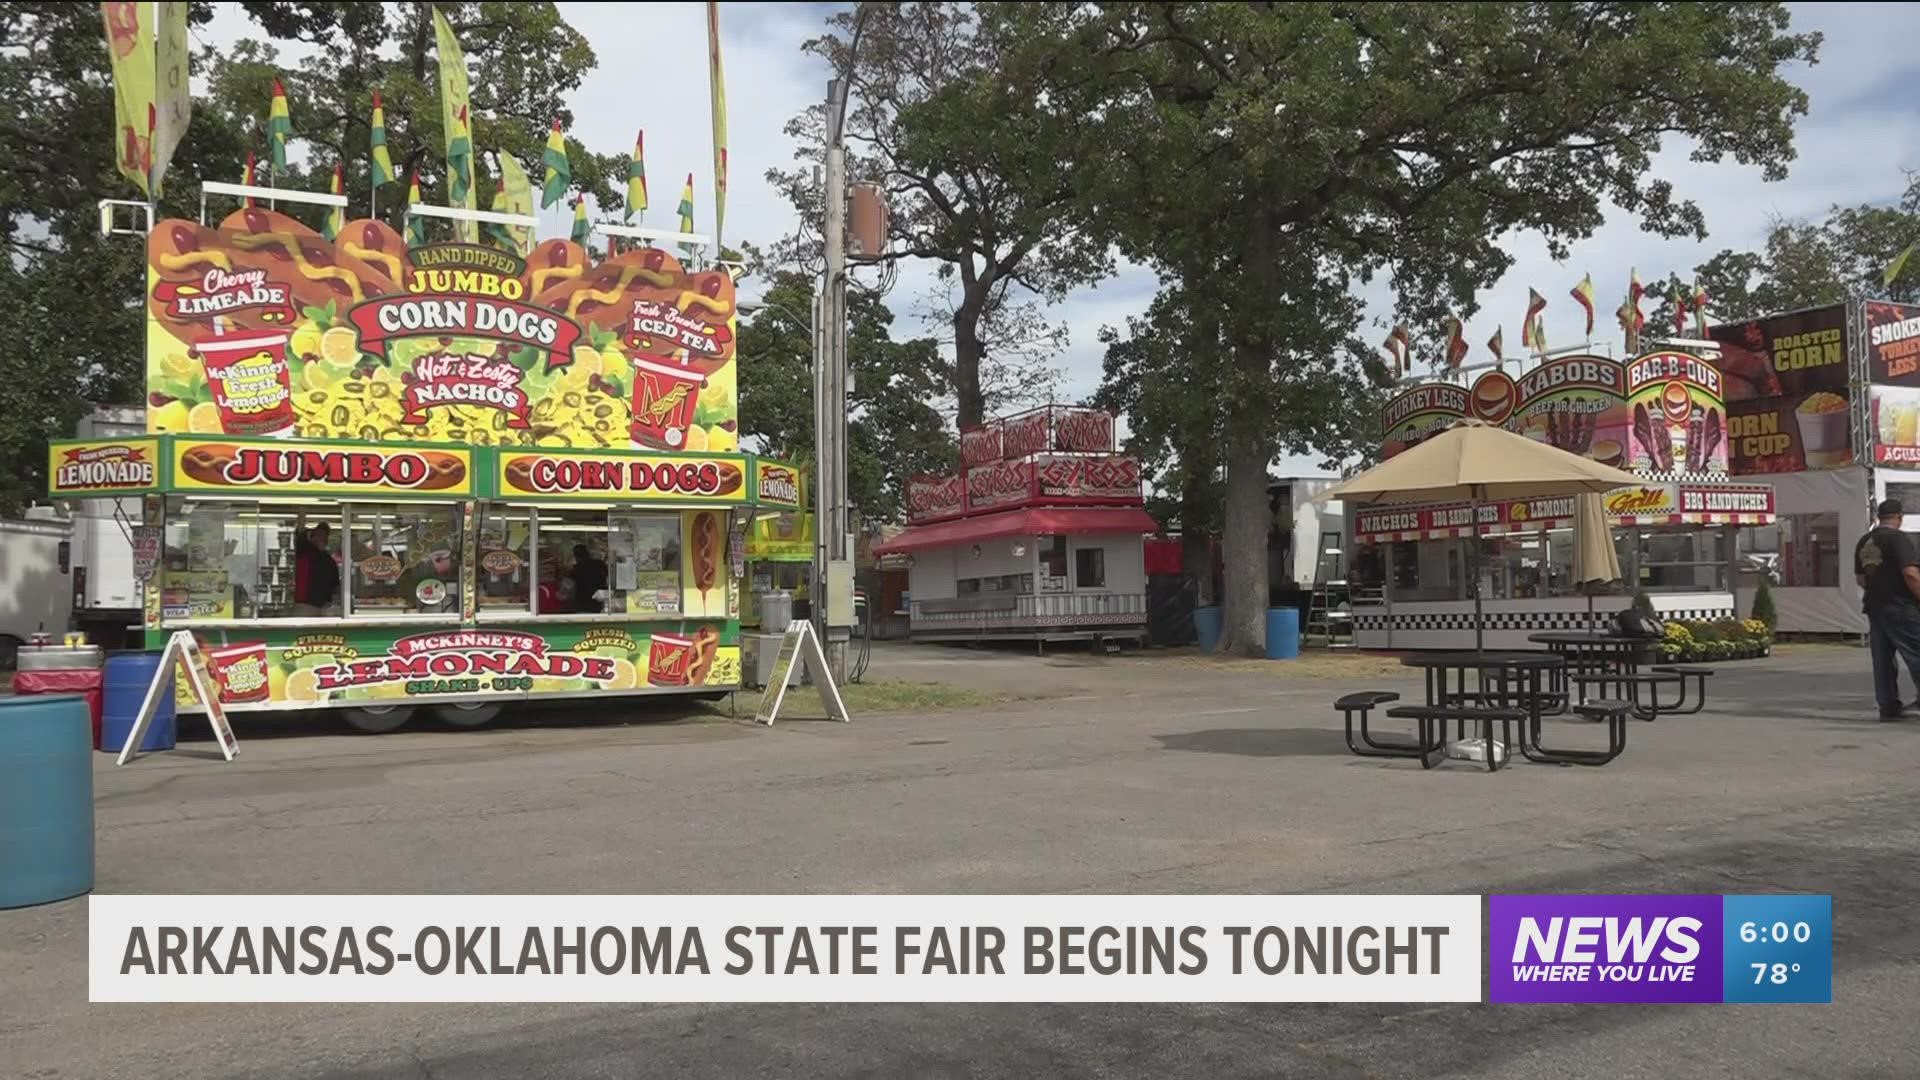 The state fair is back with more activities than ever before including free live music.